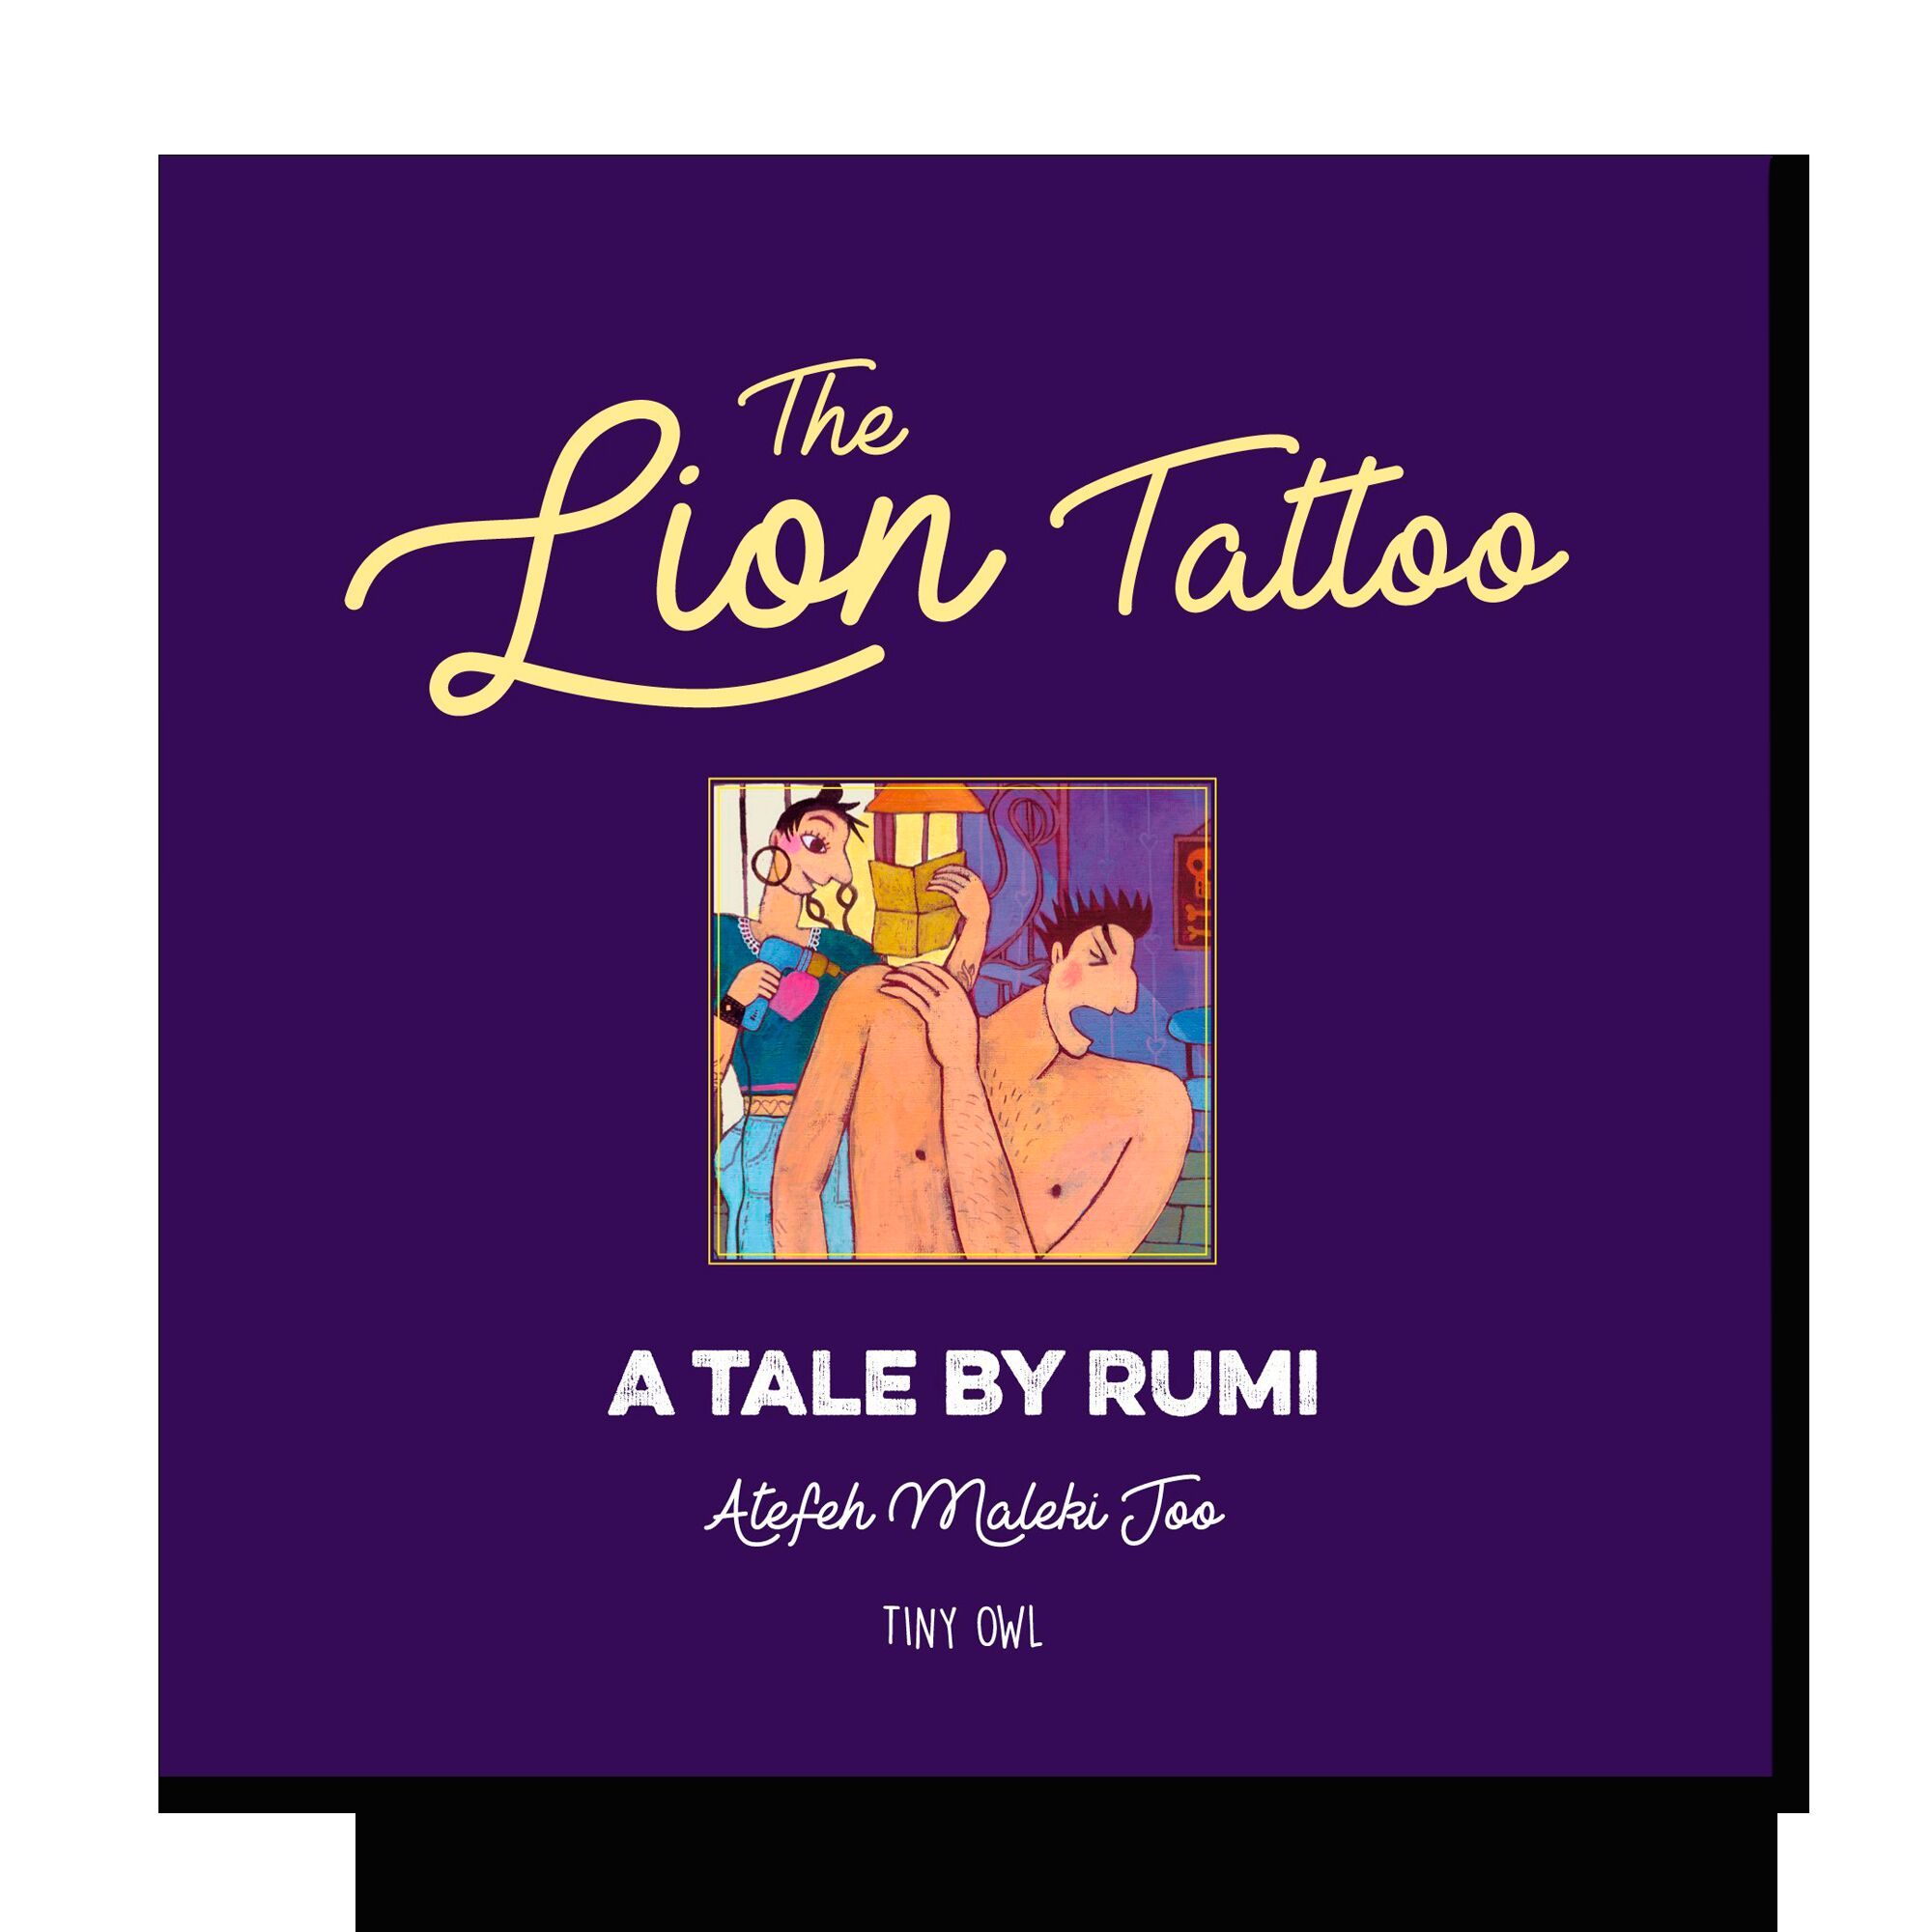 The Lion Tattoo: A Tale by Rumi